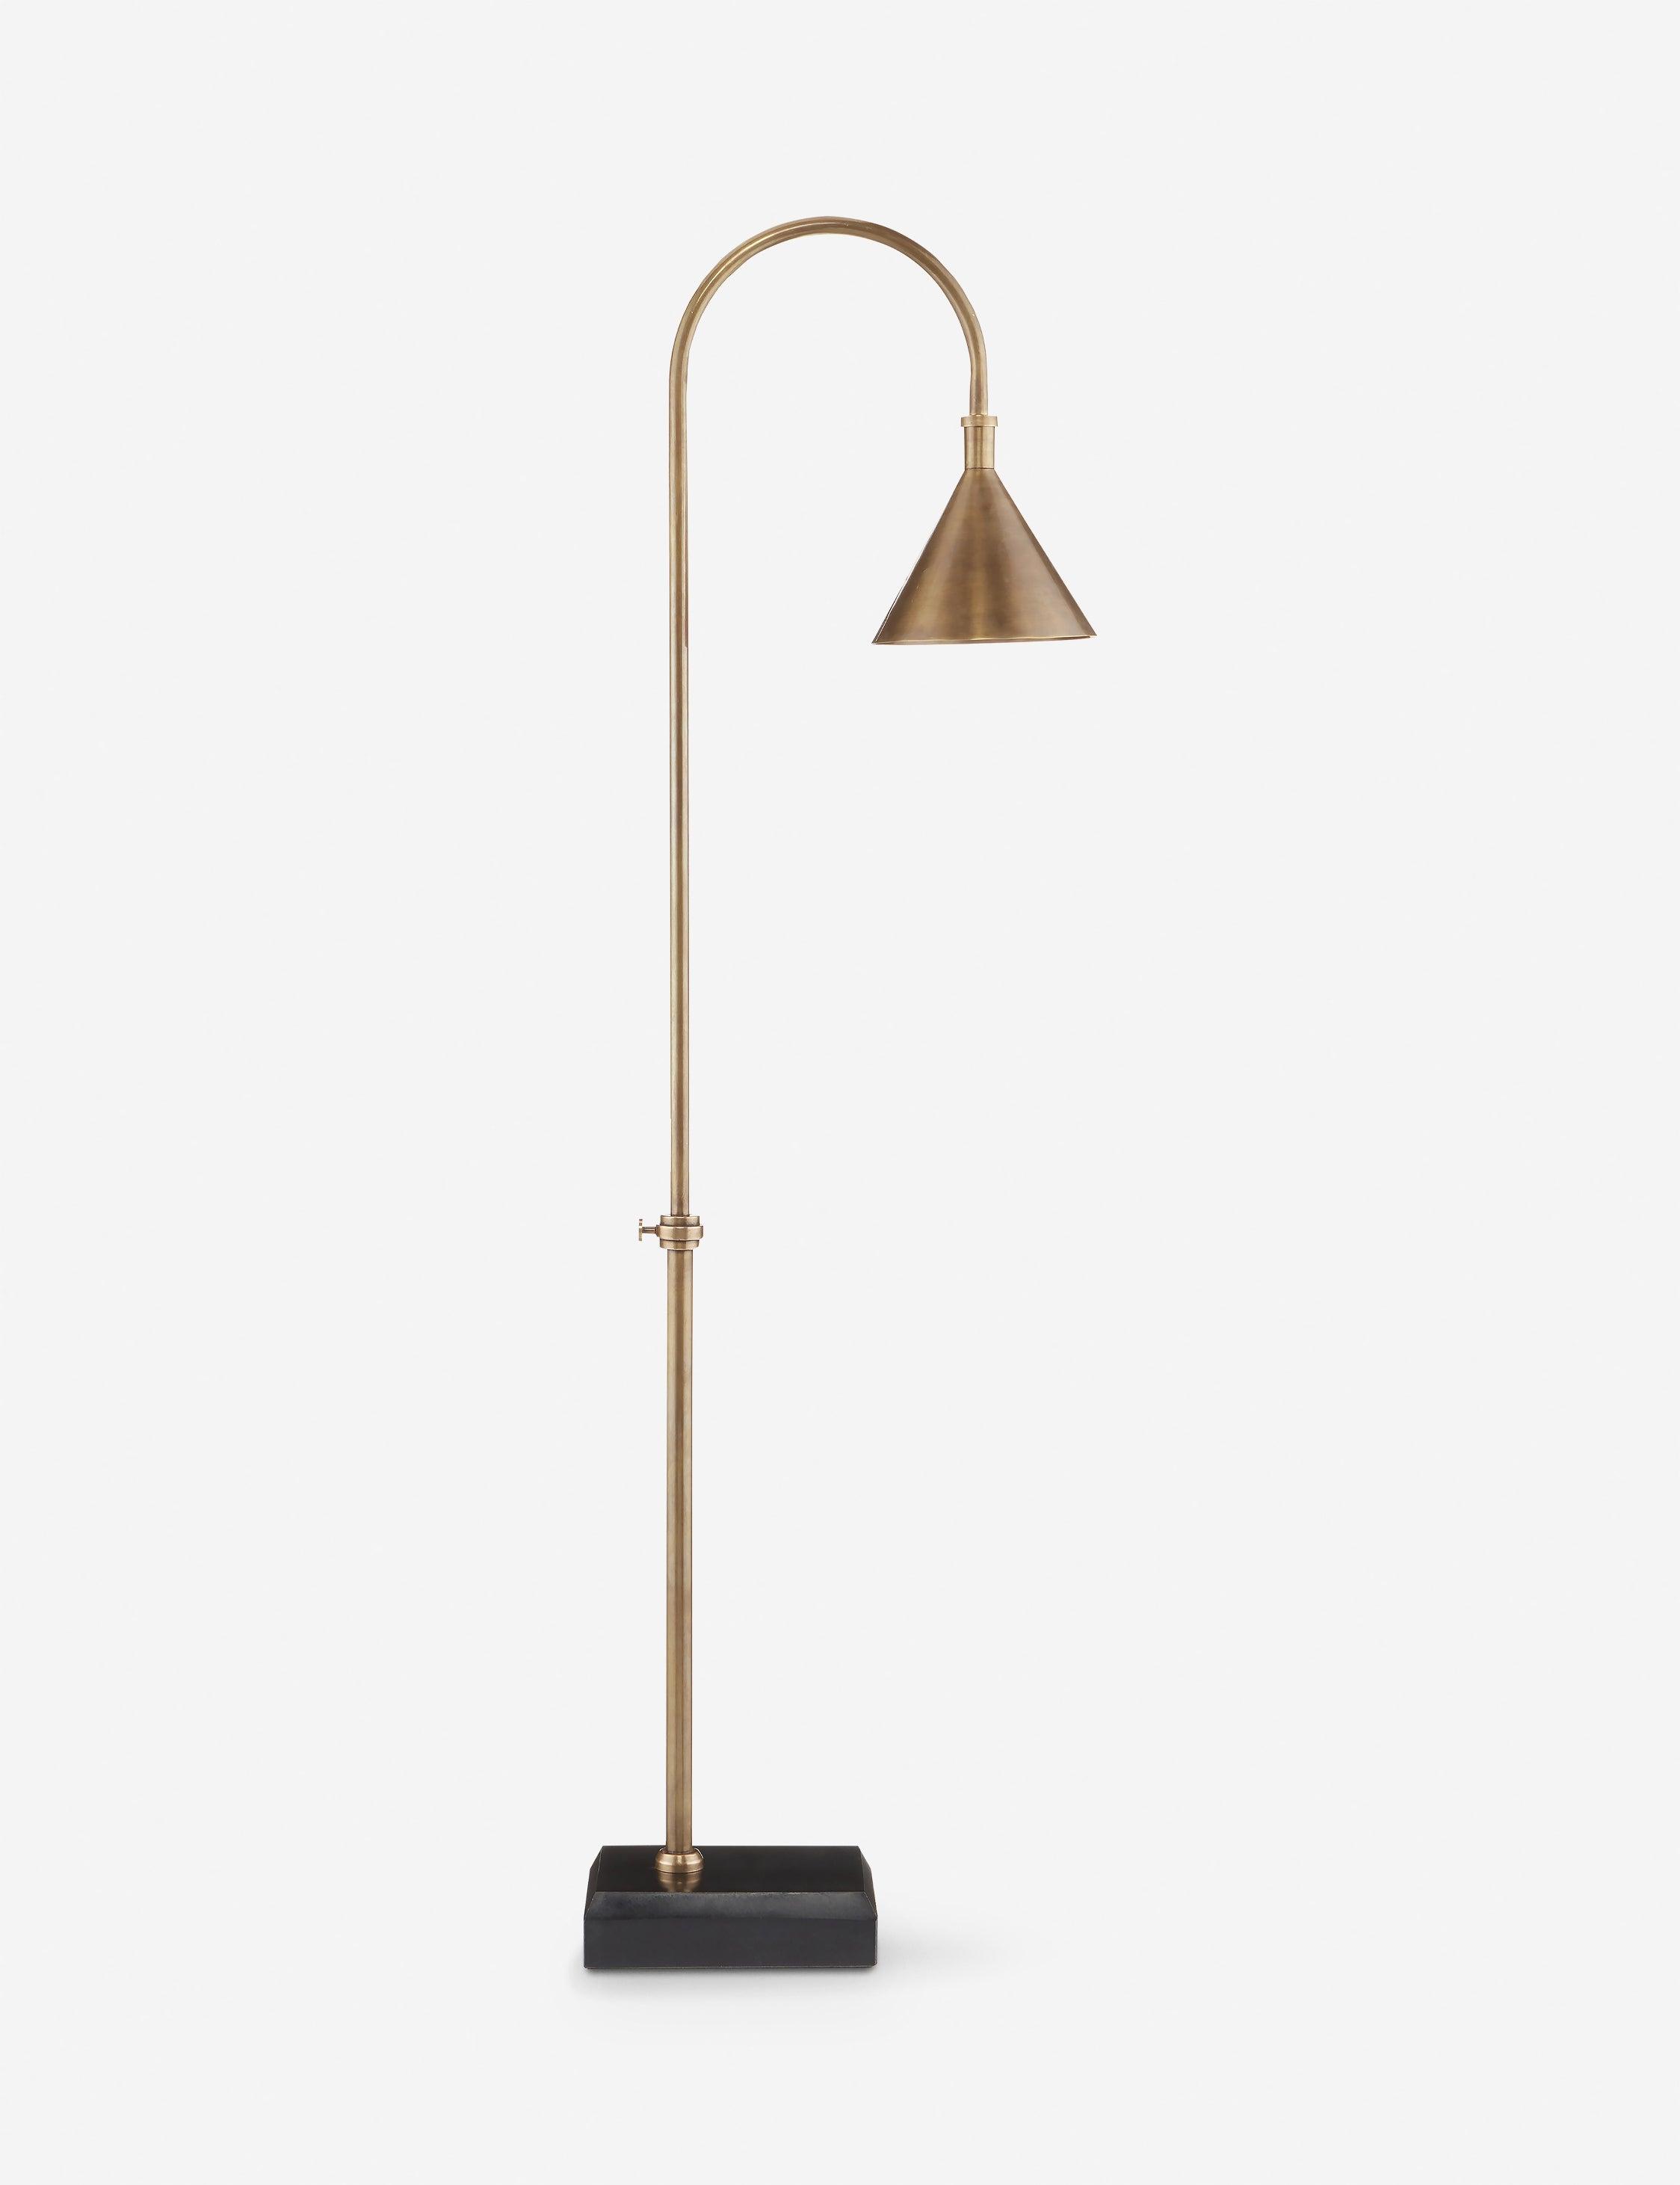 Vision Arched Cordless Floor Lamp in Vintage Brass and Black